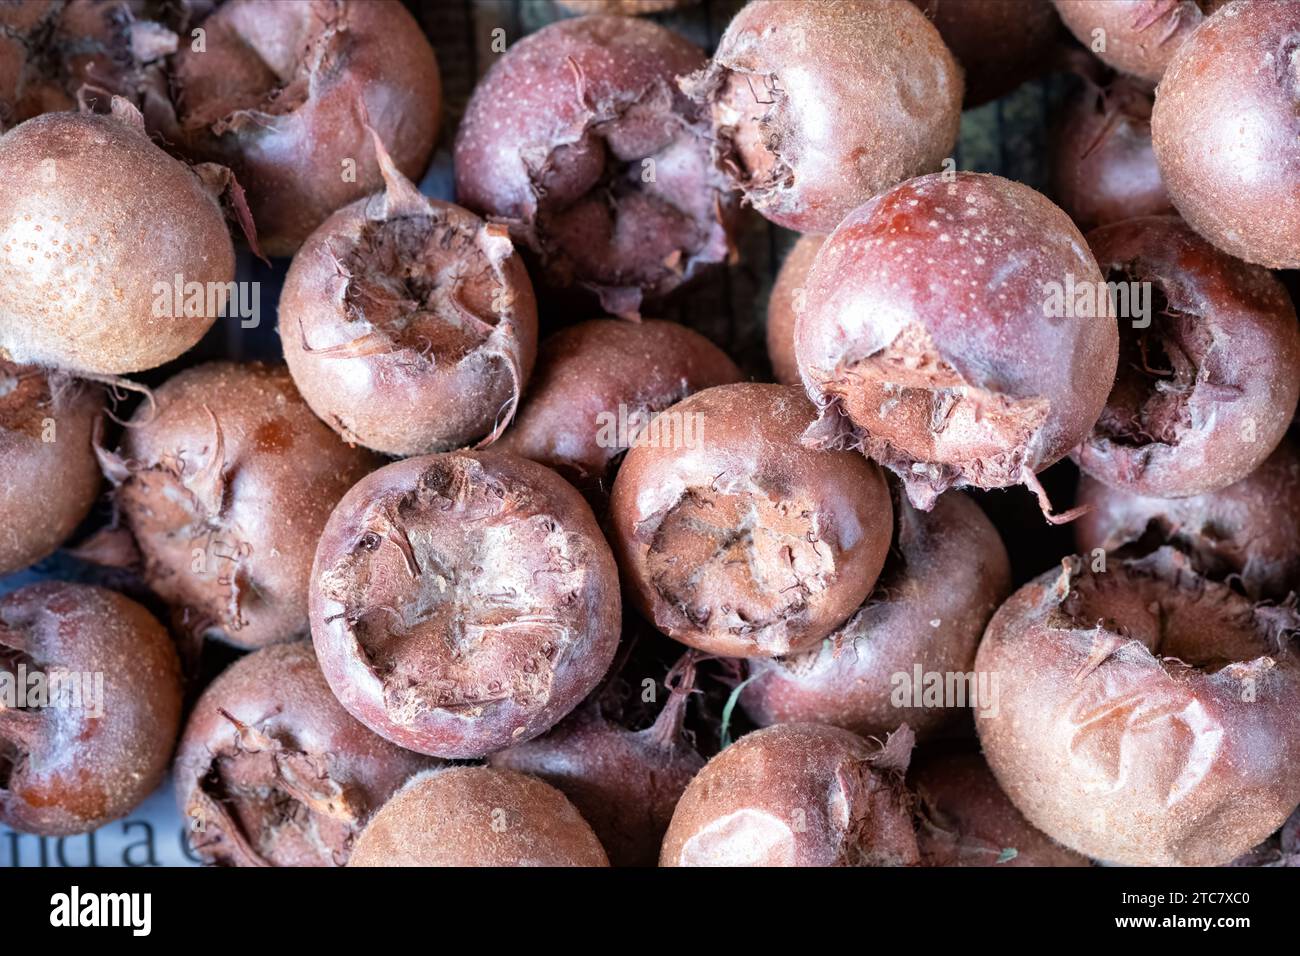 Bletted Ripe Medlars, Mespilus germanica, The fruit of the common Medlar shrub used in cooking and for making jellies and flavouring liquors Stock Photo